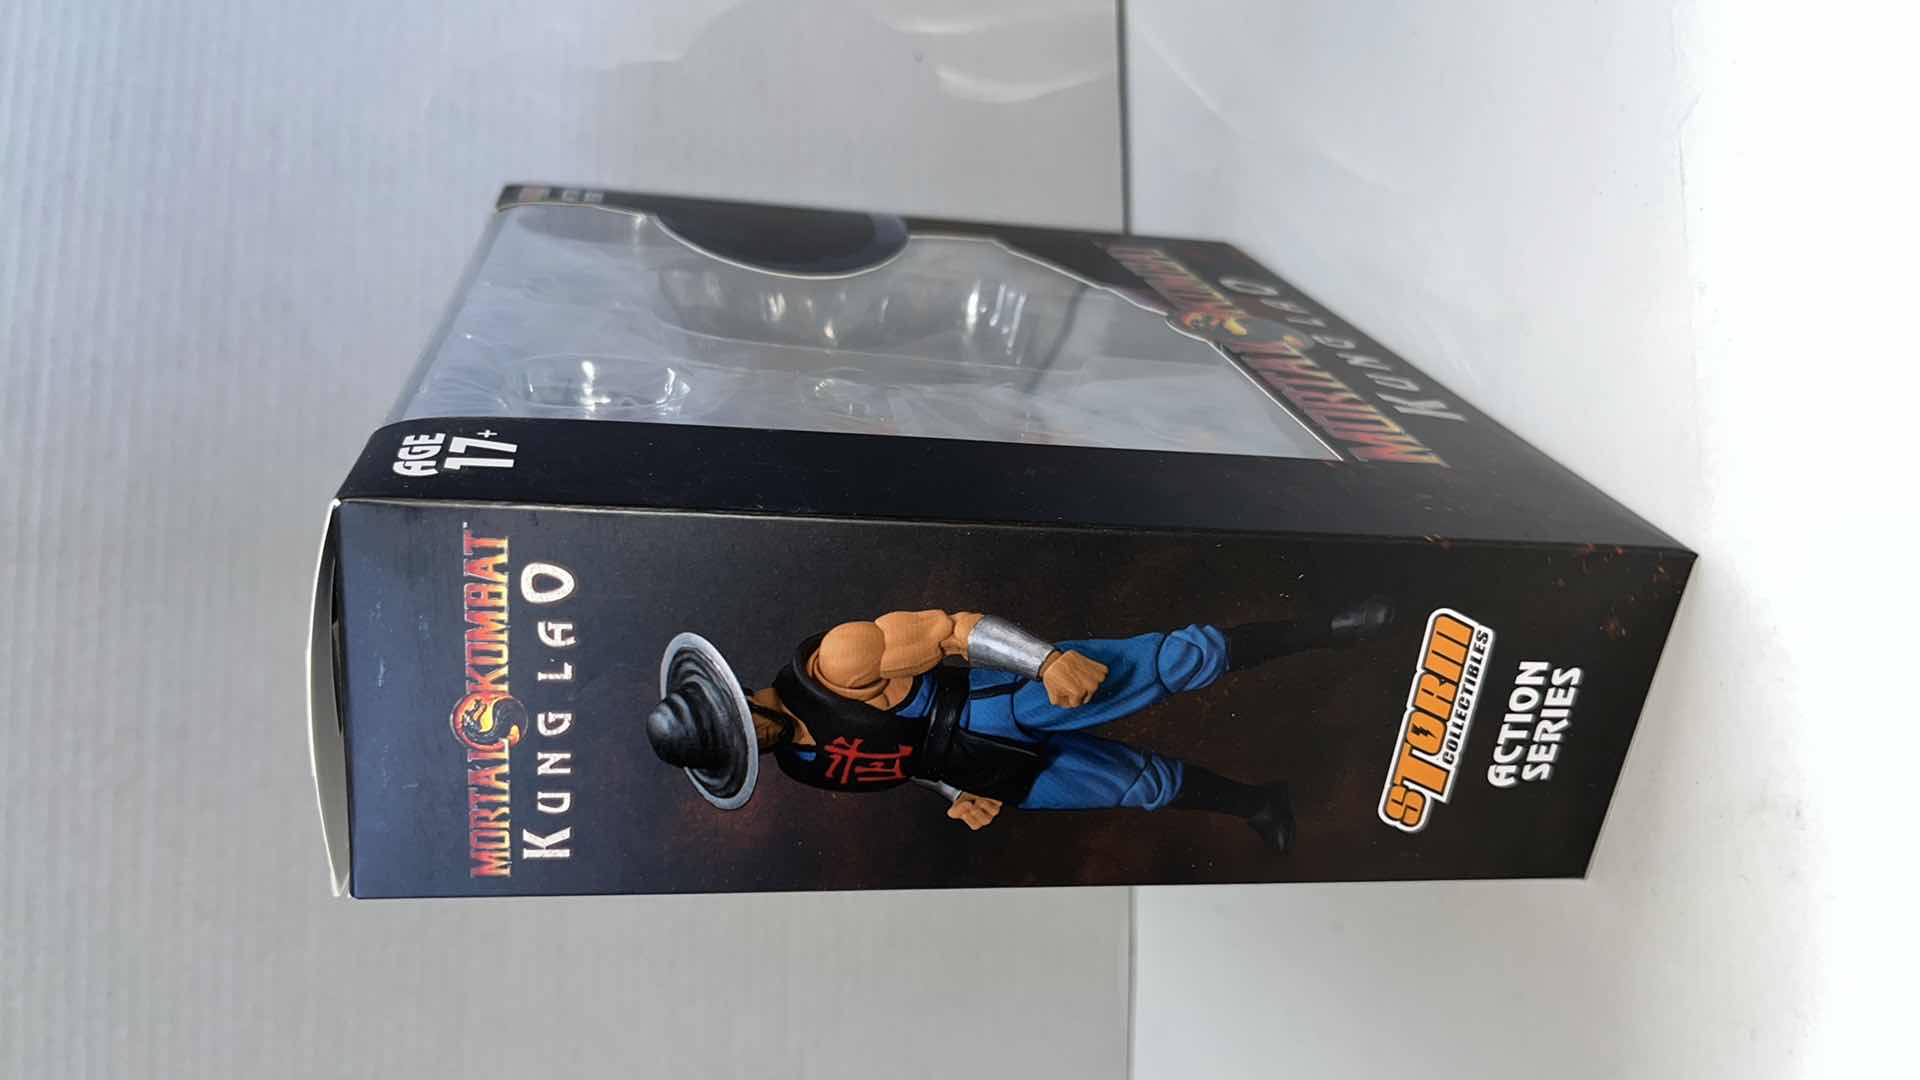 Photo 3 of NIB STORM COLLECTIBLES ACTION SERIES MORTAL KOMBAT 1/12 SCALE FIGURE & ACCESSORIES, KUNG LAO